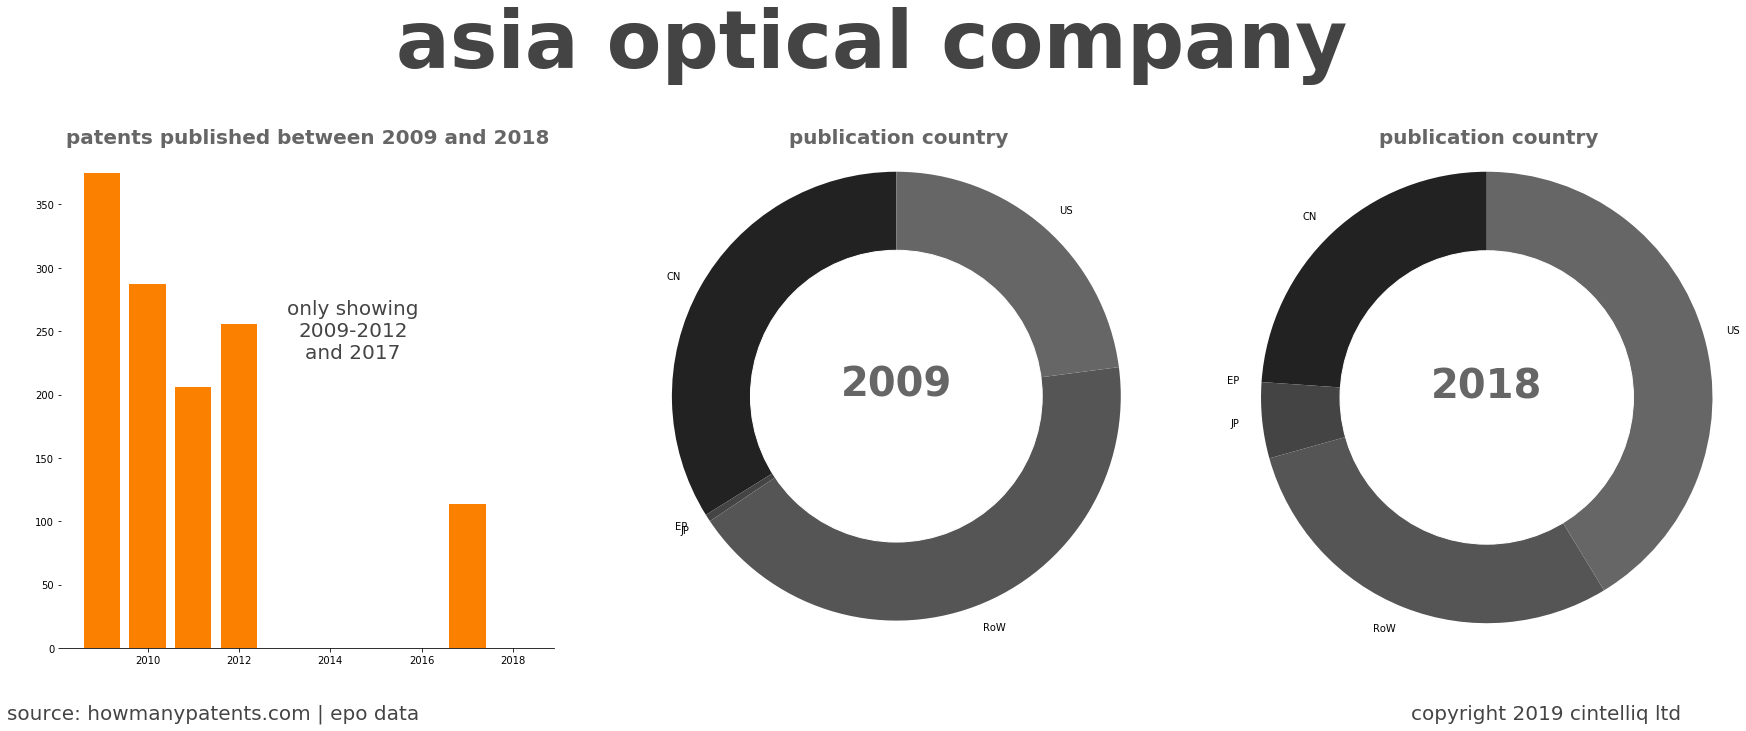 summary of patents for Asia Optical Company